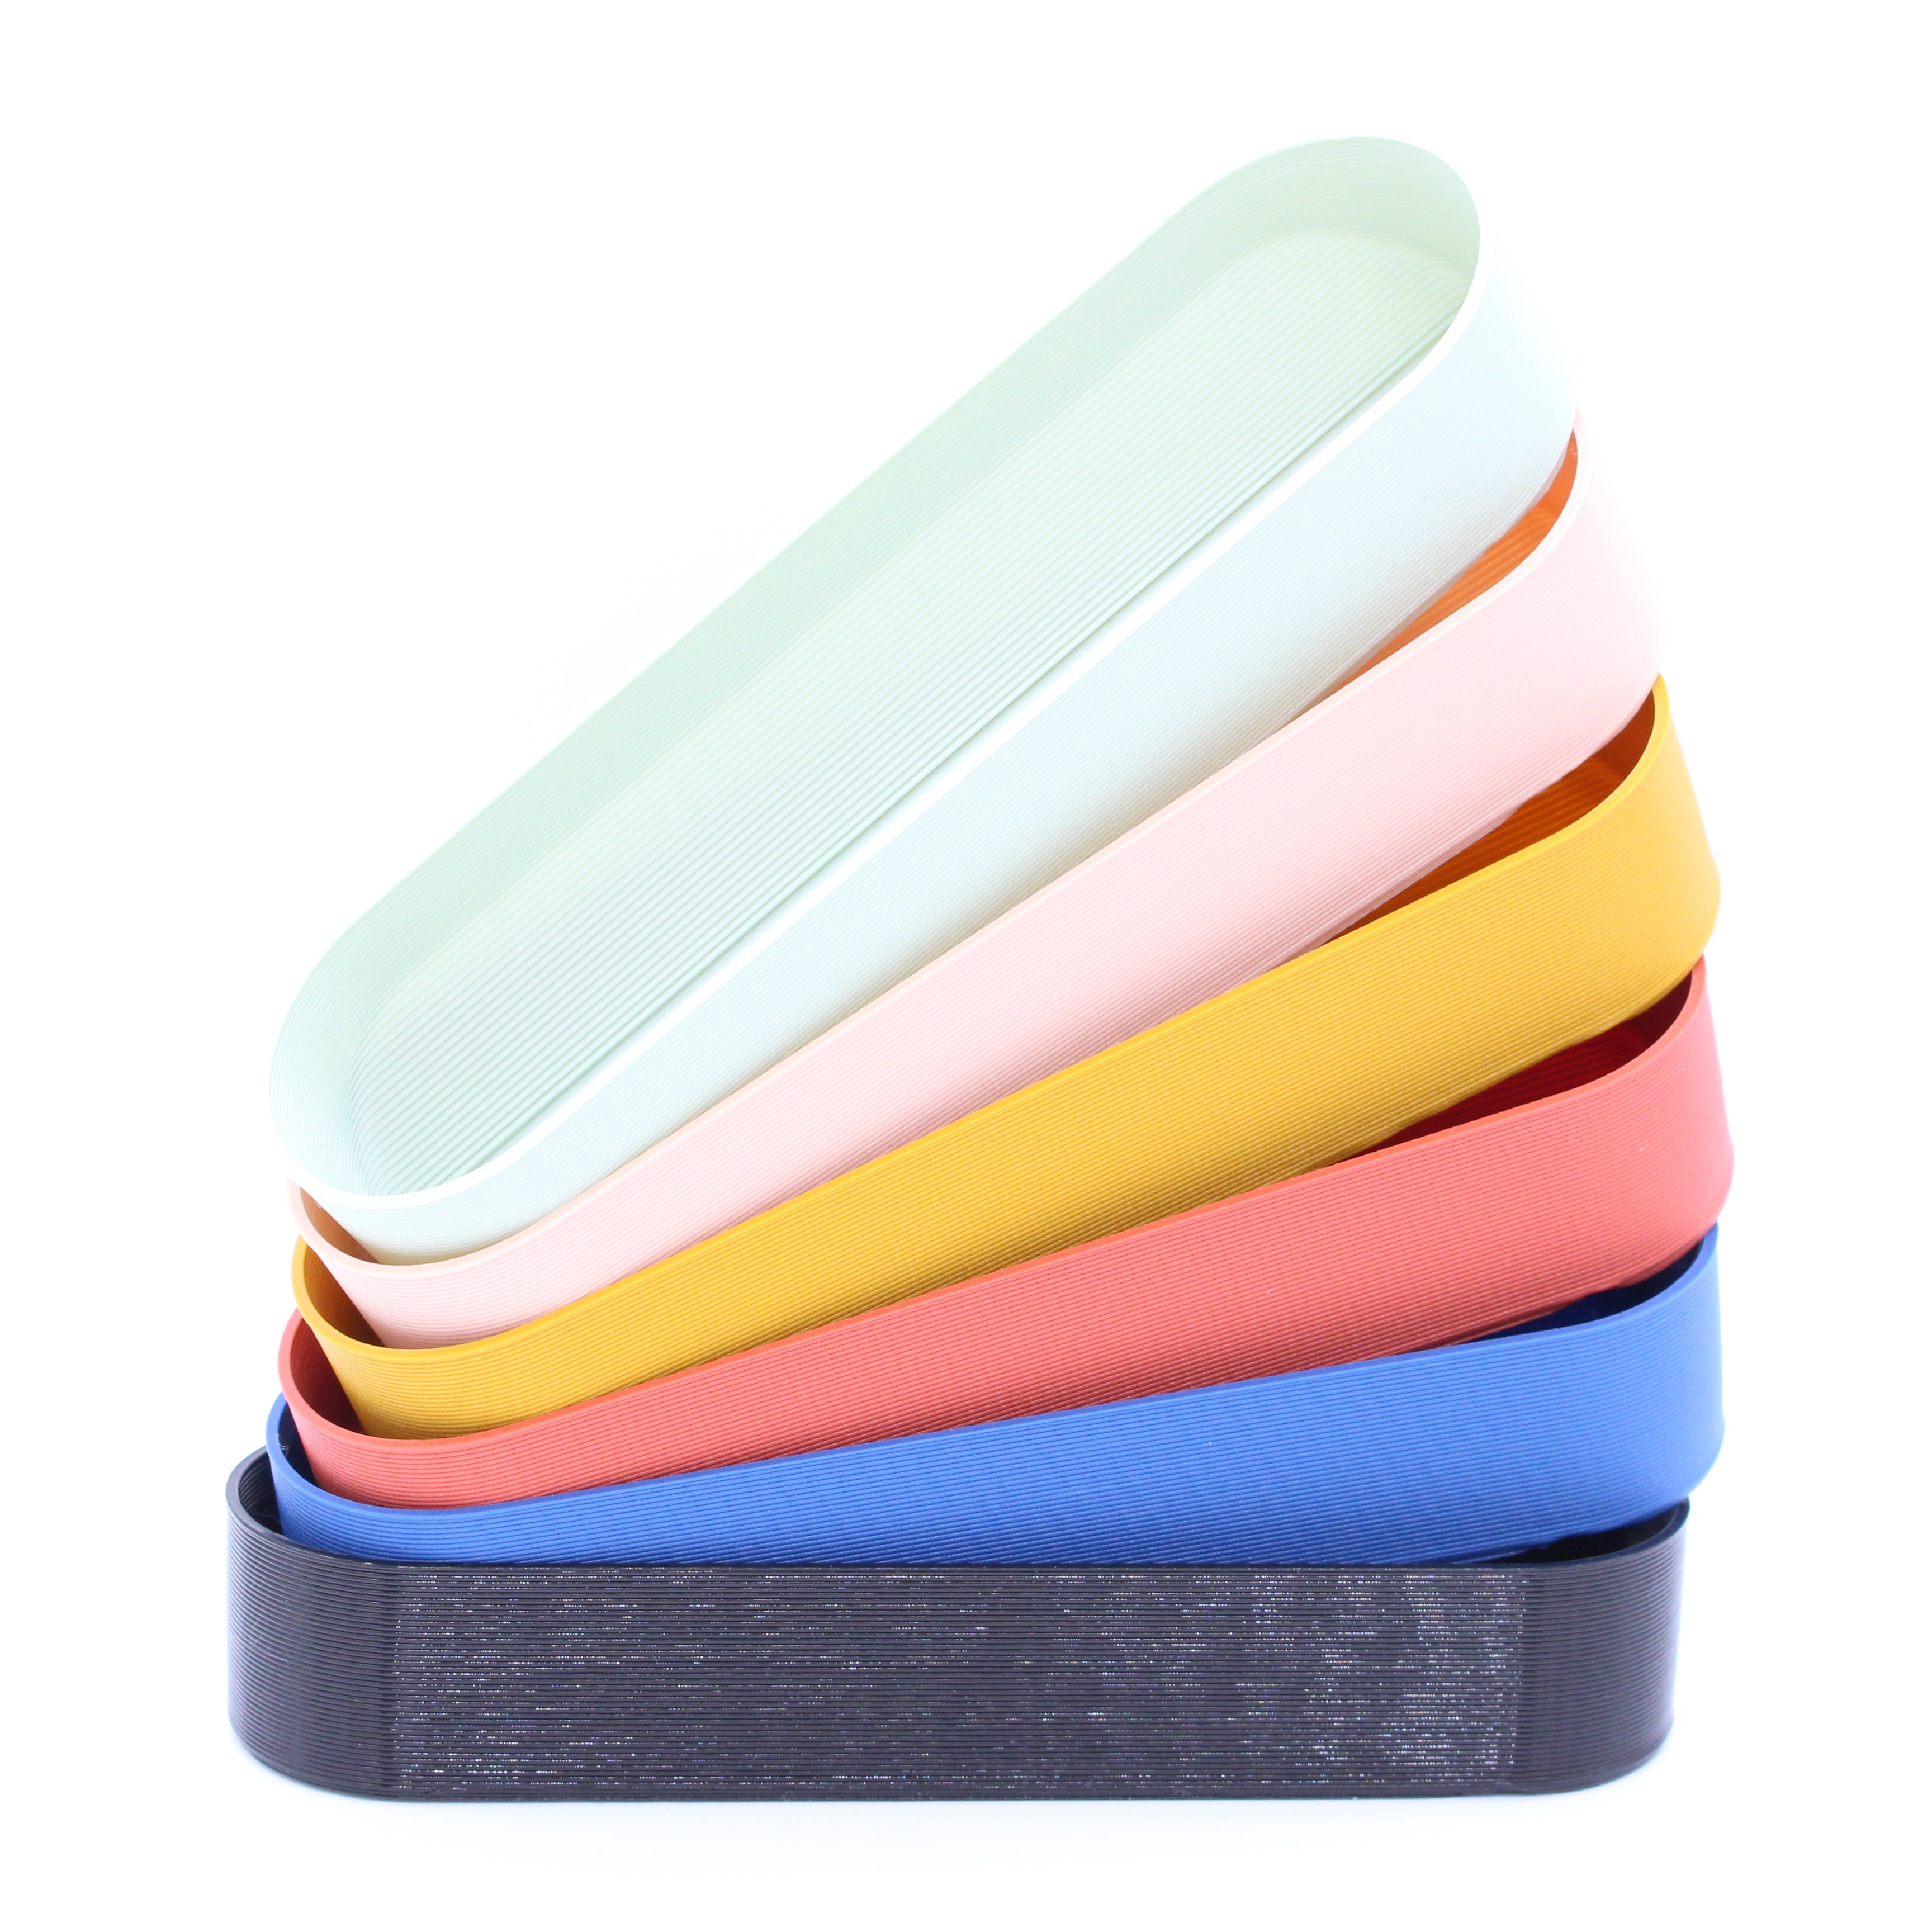 Stack of Pefto pencil trays in various colors made with recycled plastic by Deme Design